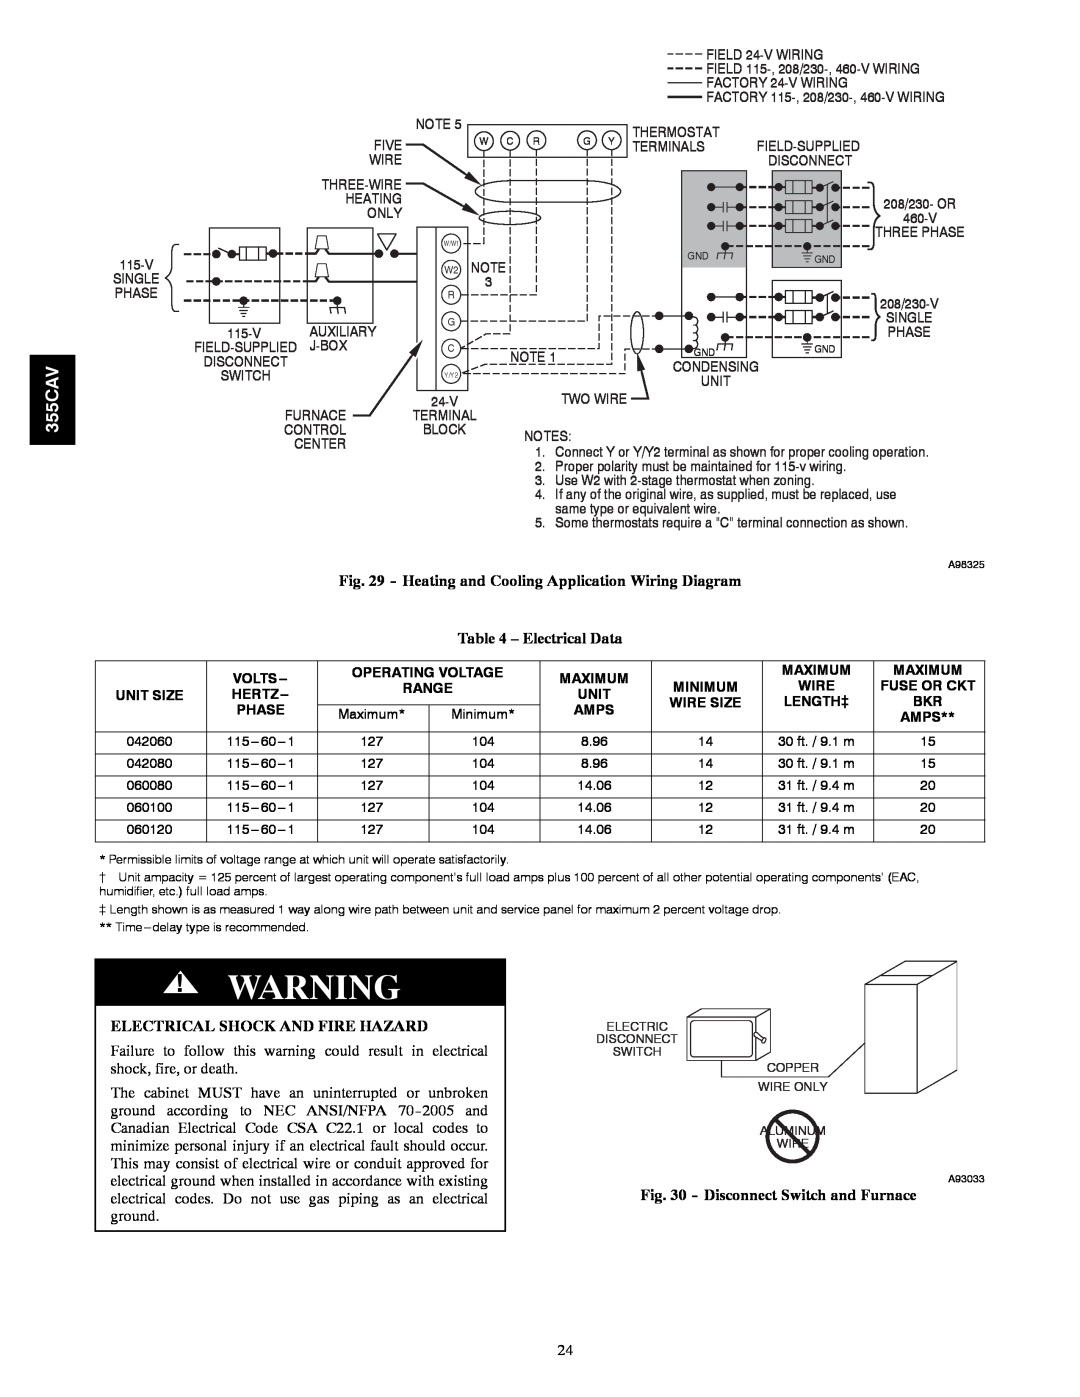 Bryant 355CAV installation instructions Electrical Data, Electrical Shock And Fire Hazard, Disconnect Switch and Furnace 